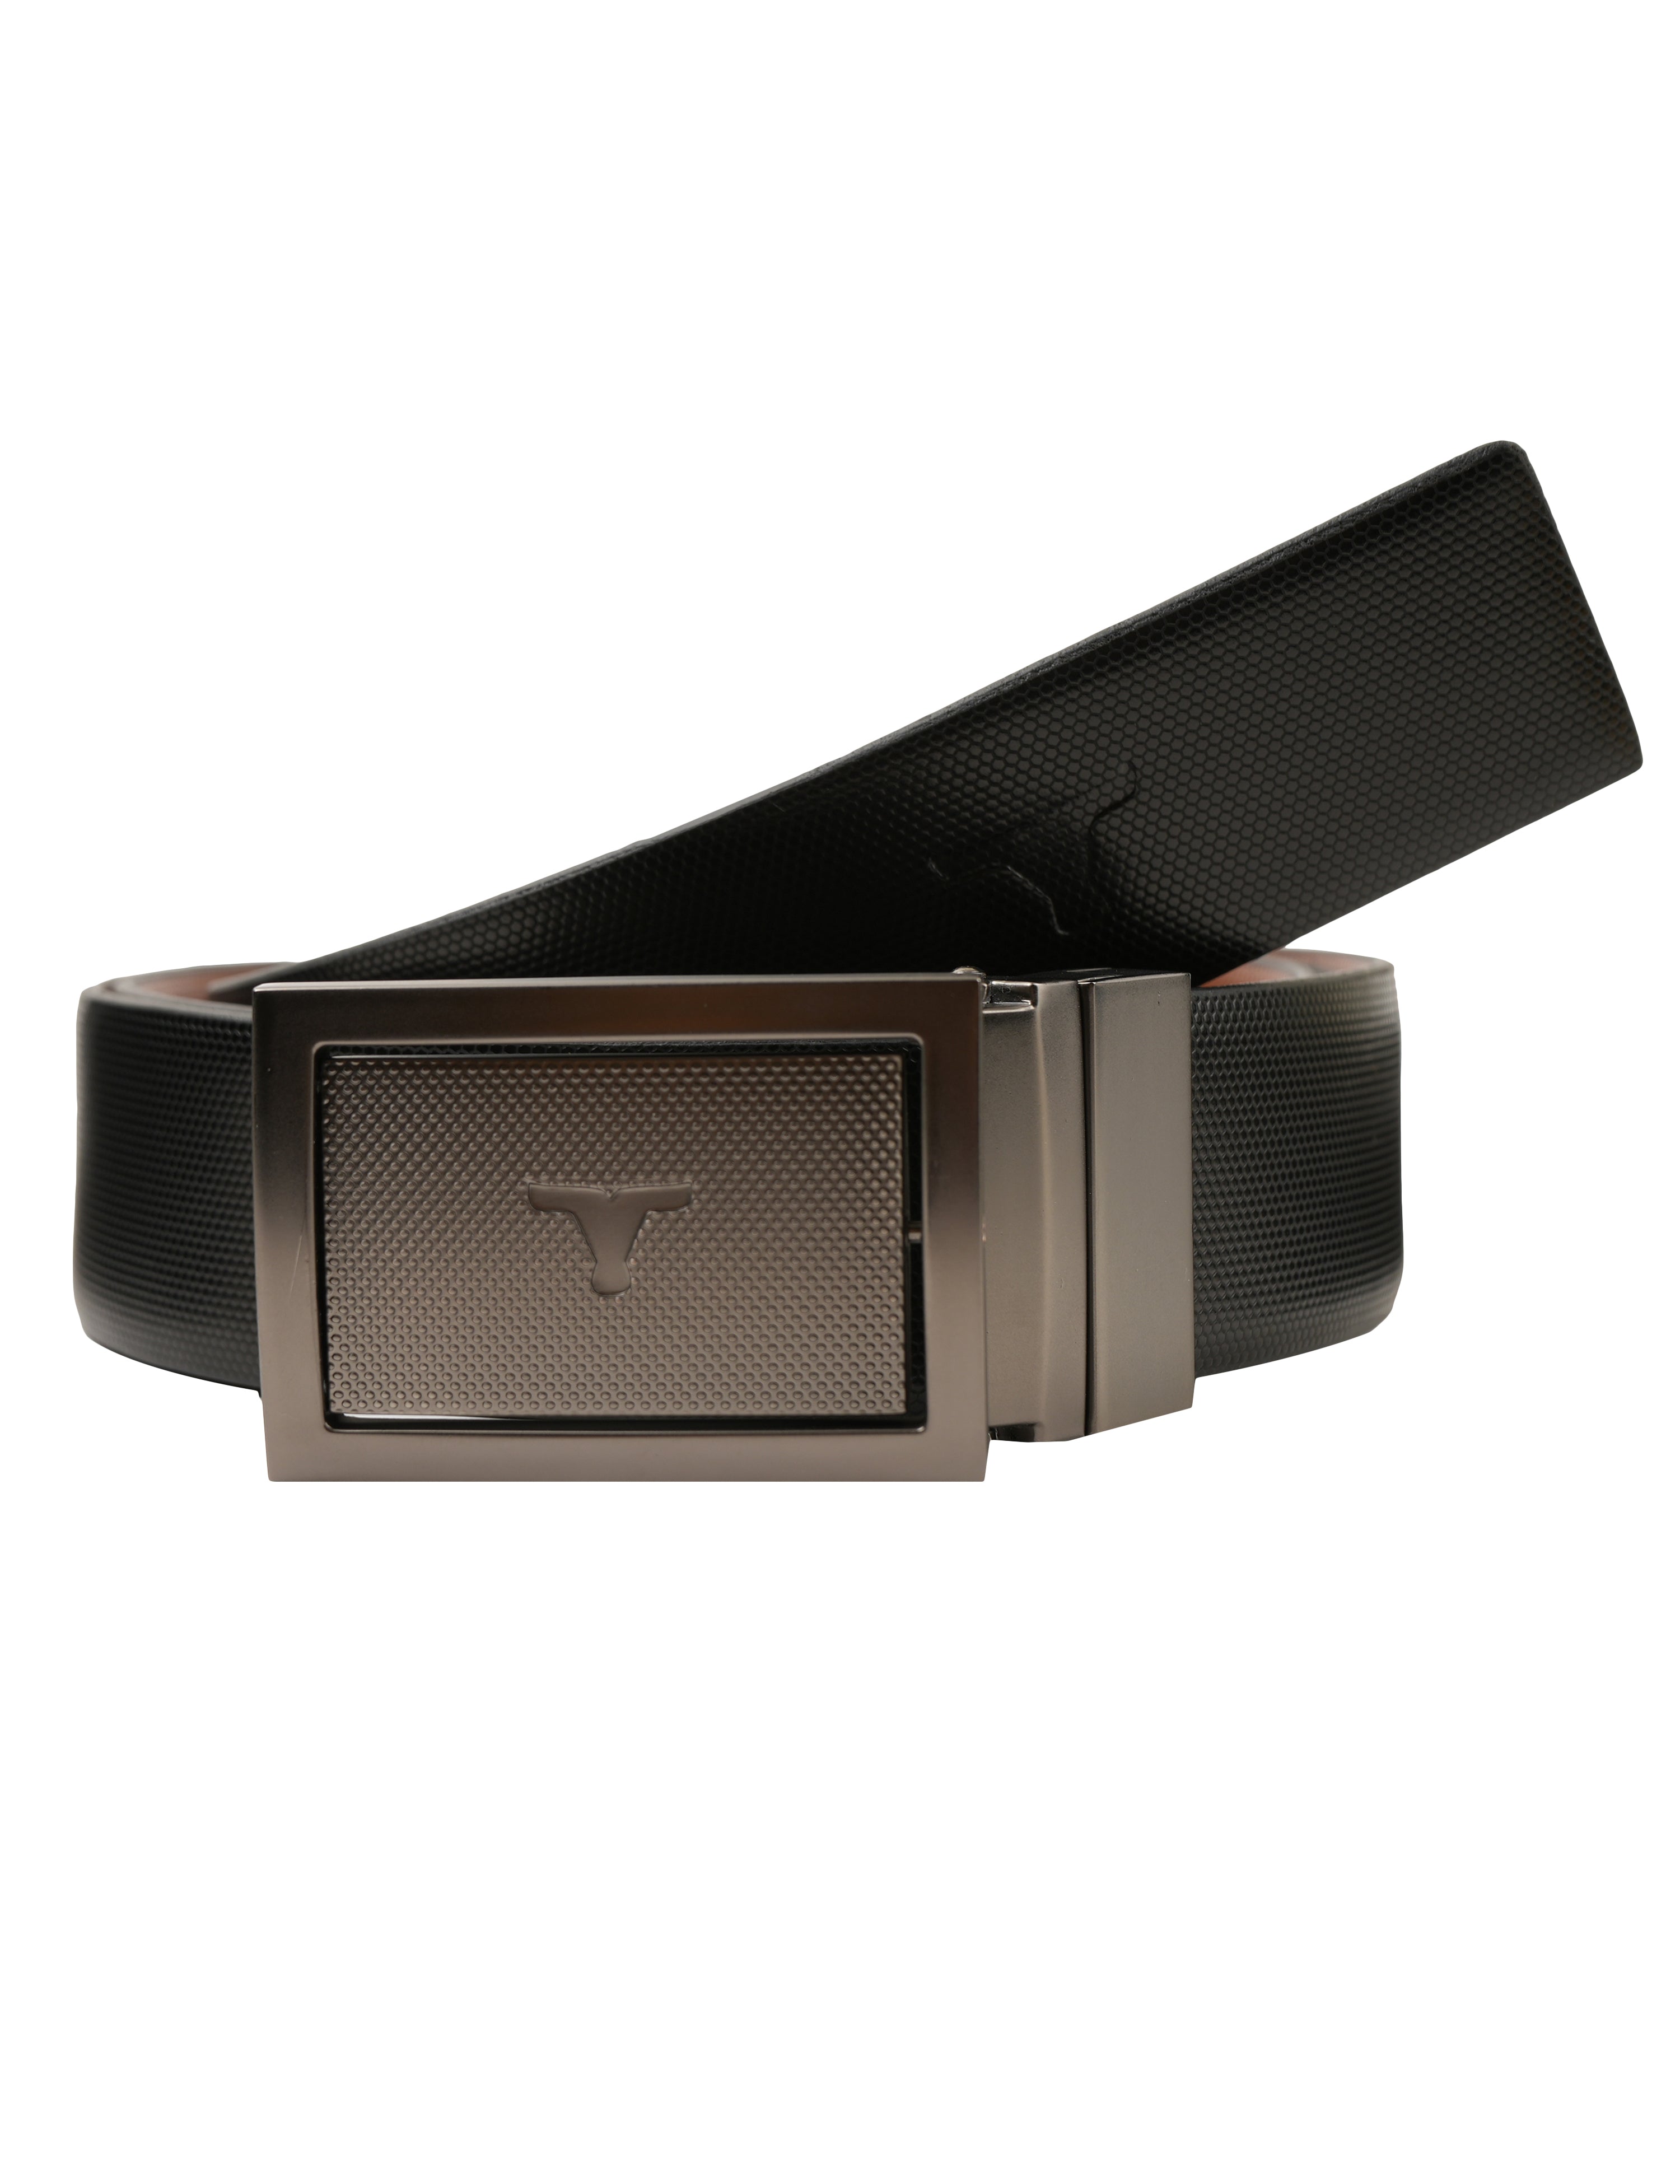 Bulchee Men's Collection Four way belt with Textured Black and Tan Leather and a Reversible Buckle (BUL2315B)